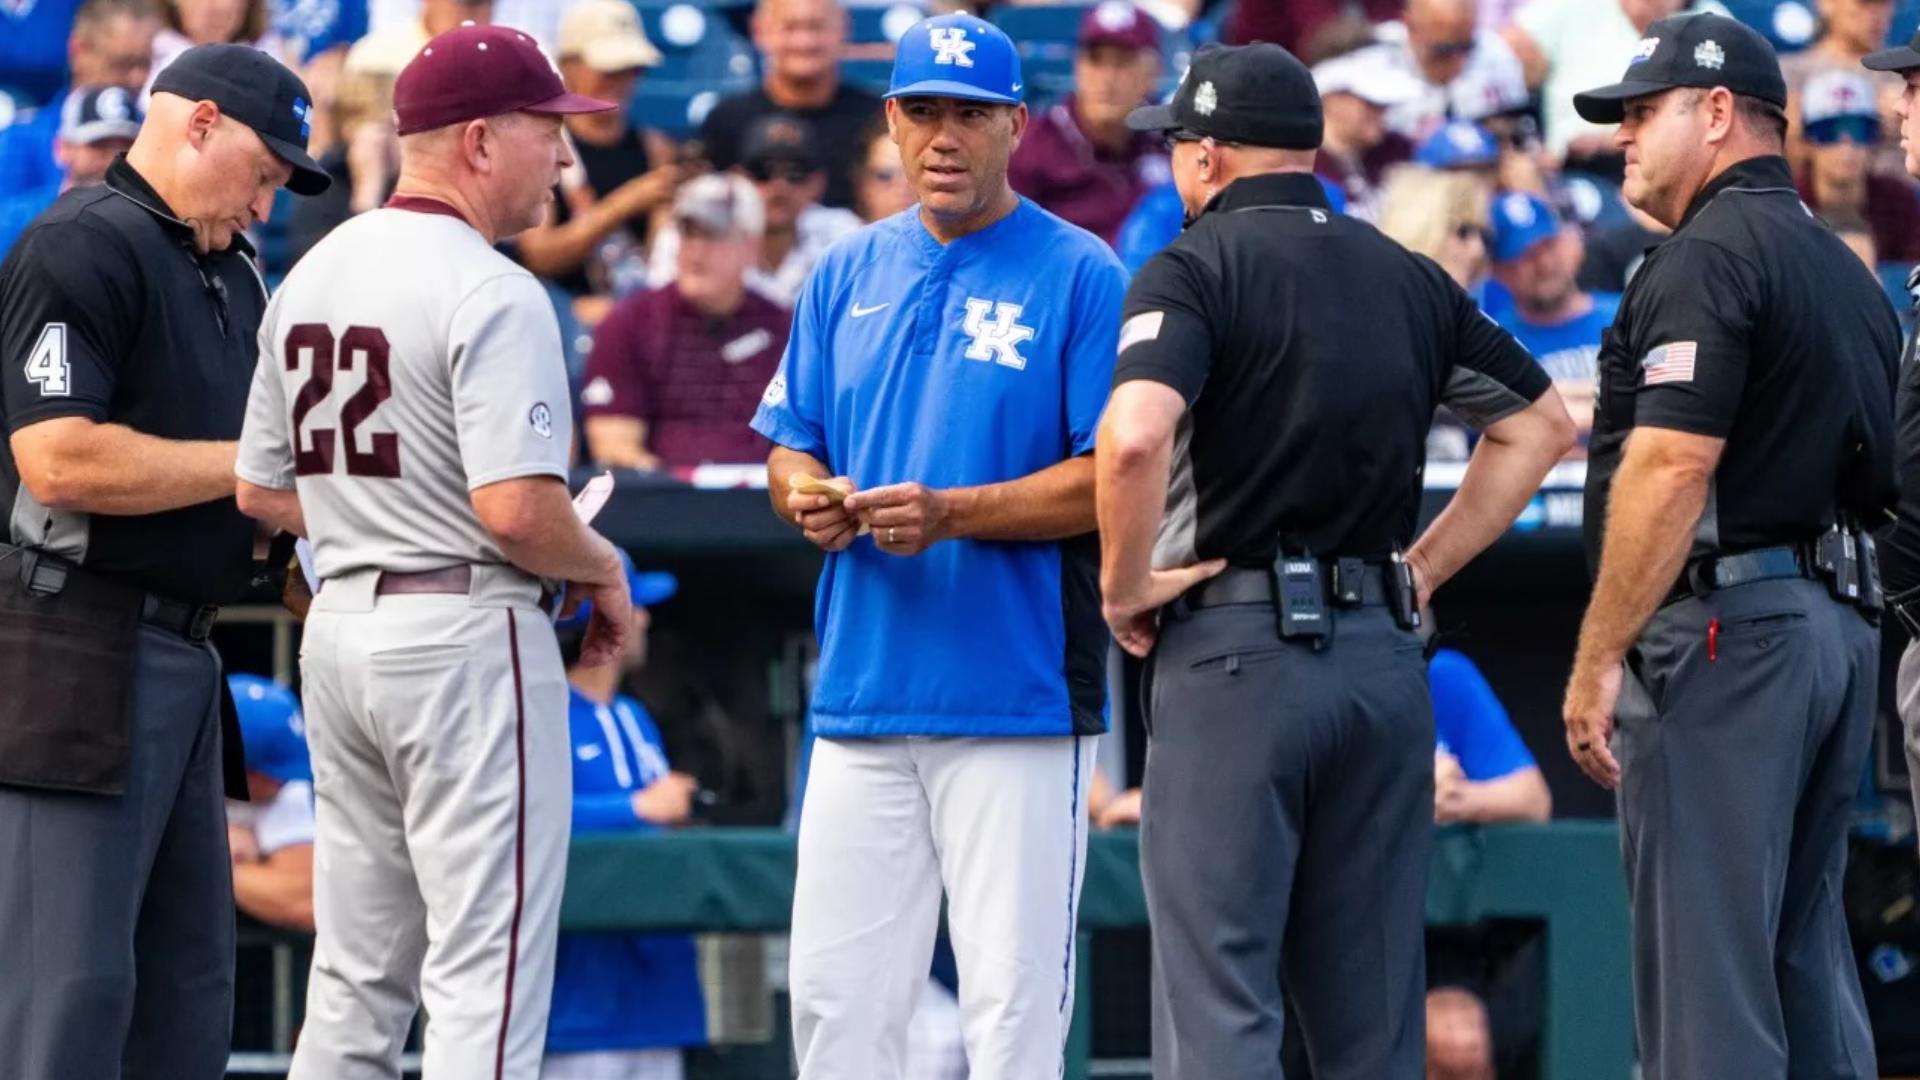 Hope College graduate David Uyl was a part of the eight-man umpire crew in Omaha.